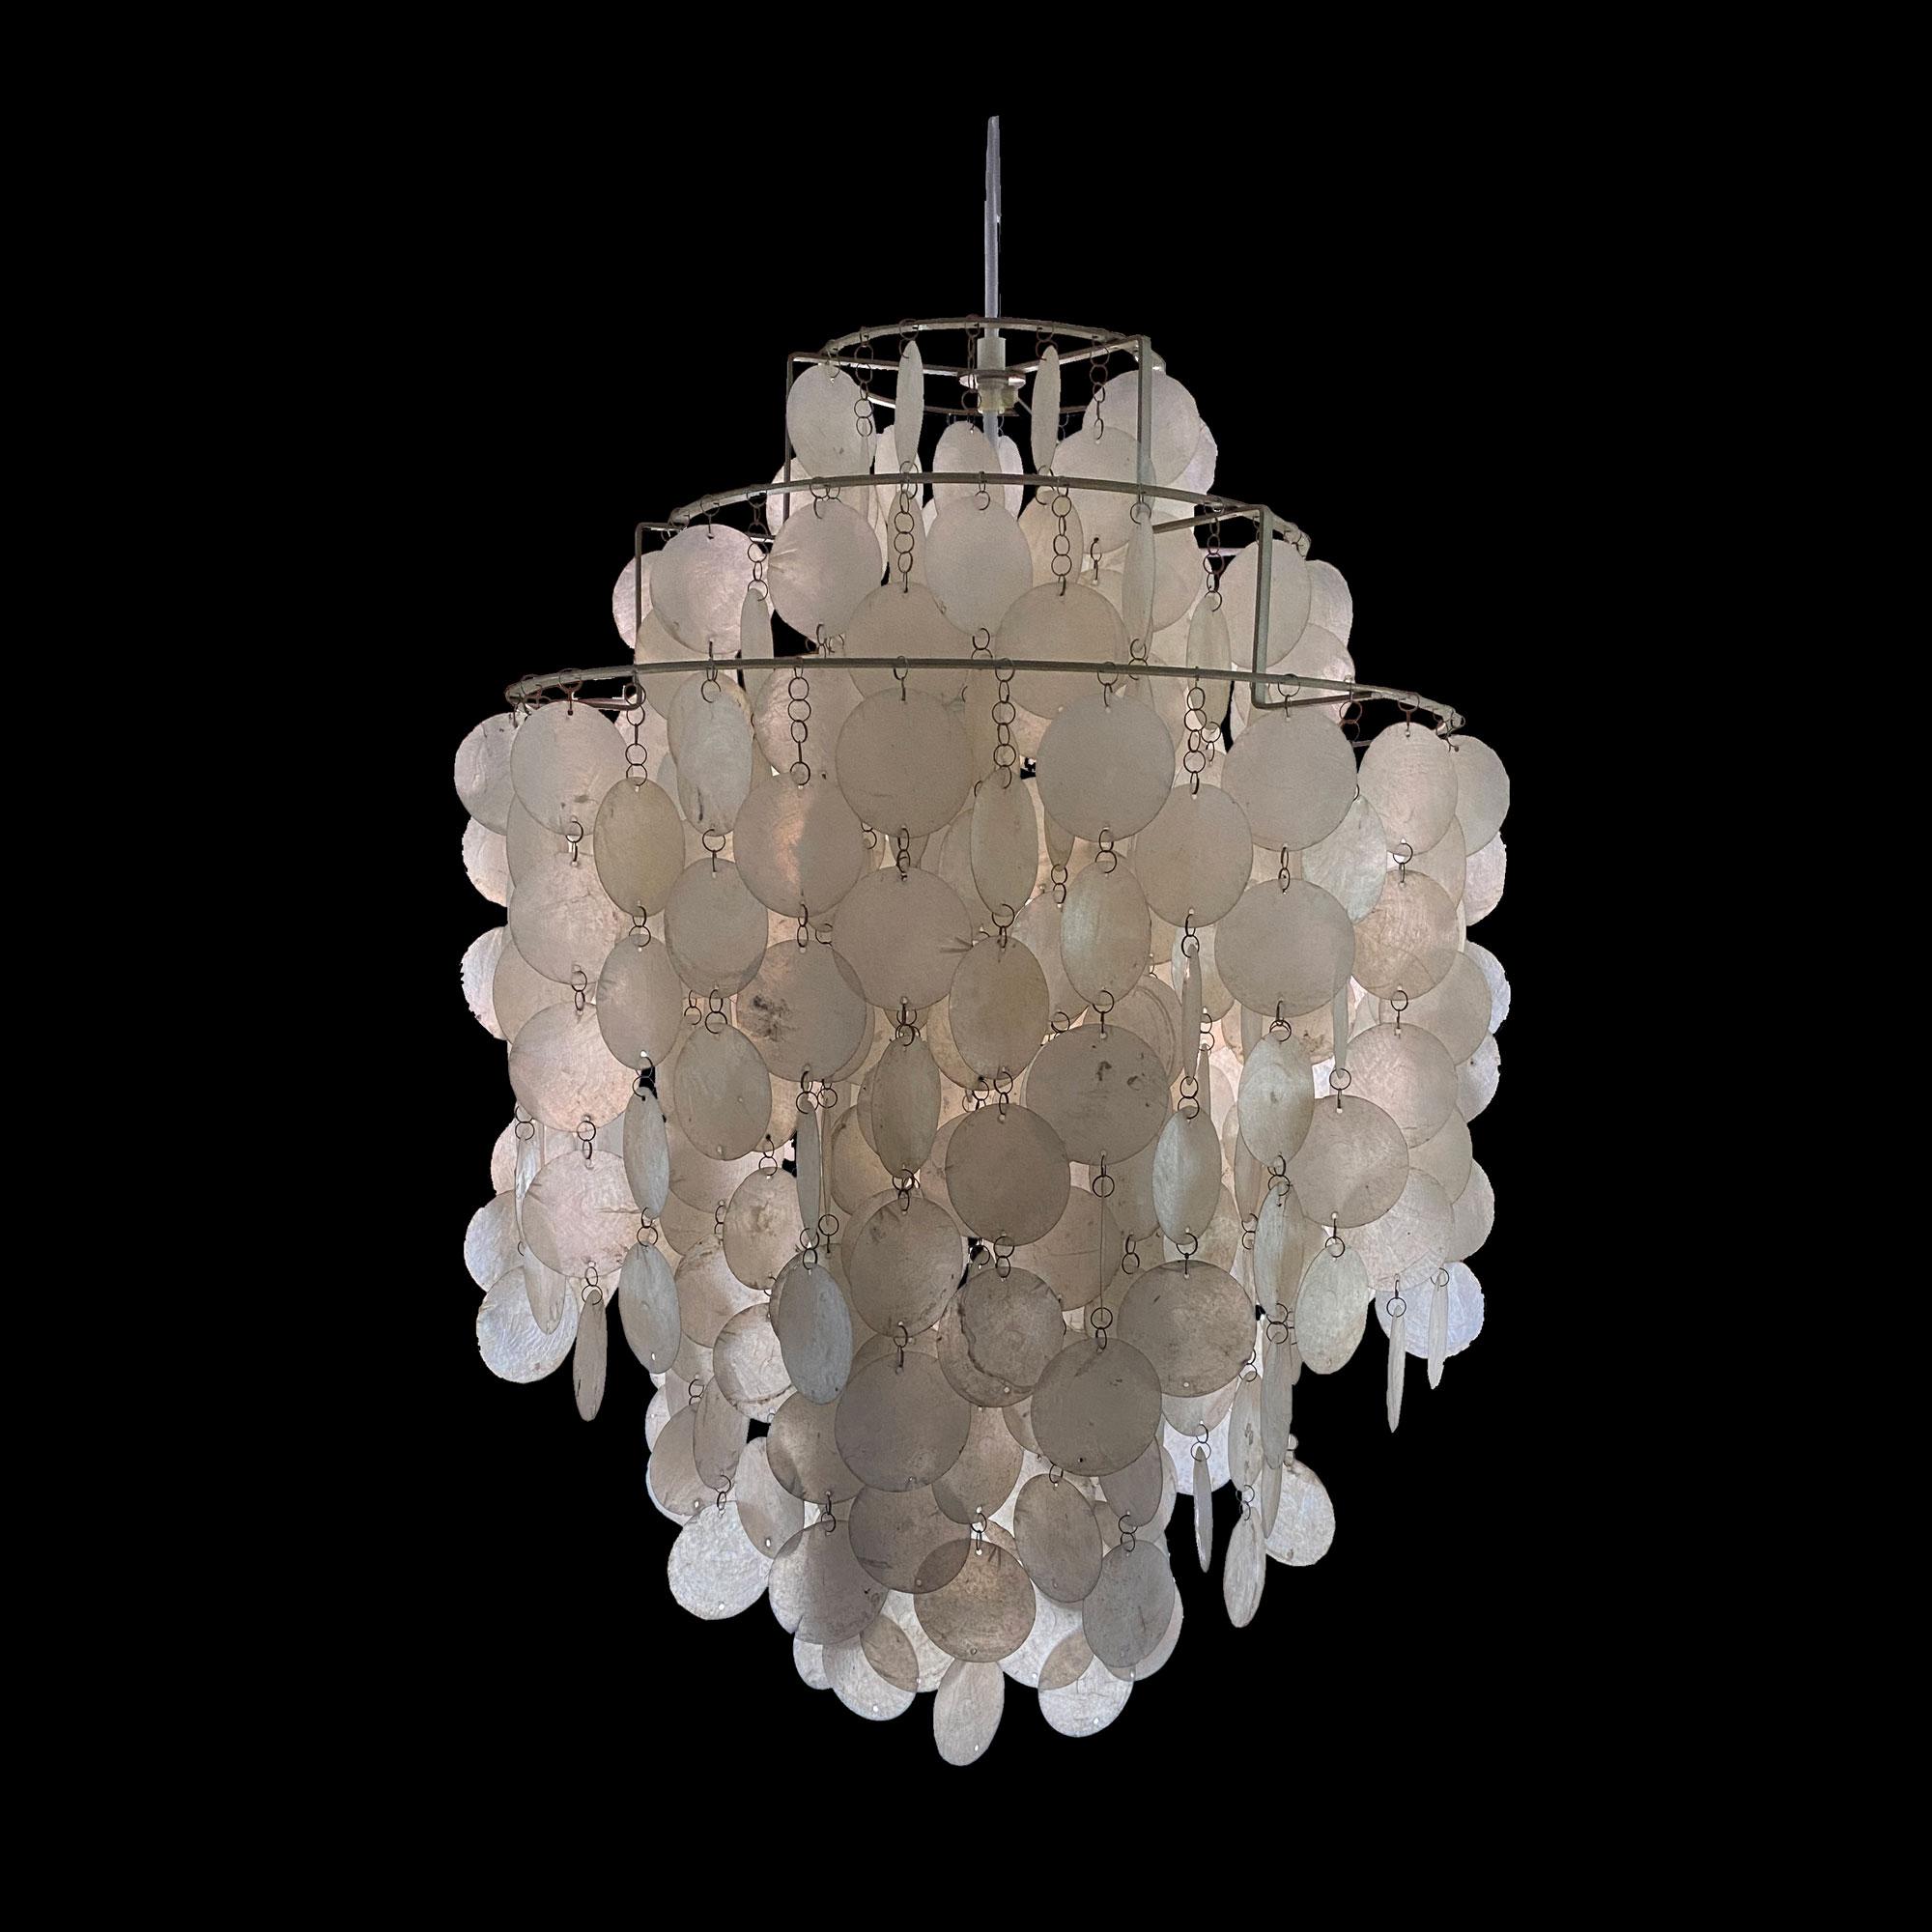 Original Chandelier, model, 2DM Fun, design 1968, J Lüber, Basel
Nickel-plated metal and mother-of-pearl. Garlands of circular mother-of-pearl plates suspended from three rings of increasing diameter on three levels.
H 60cm Diam 40 cm